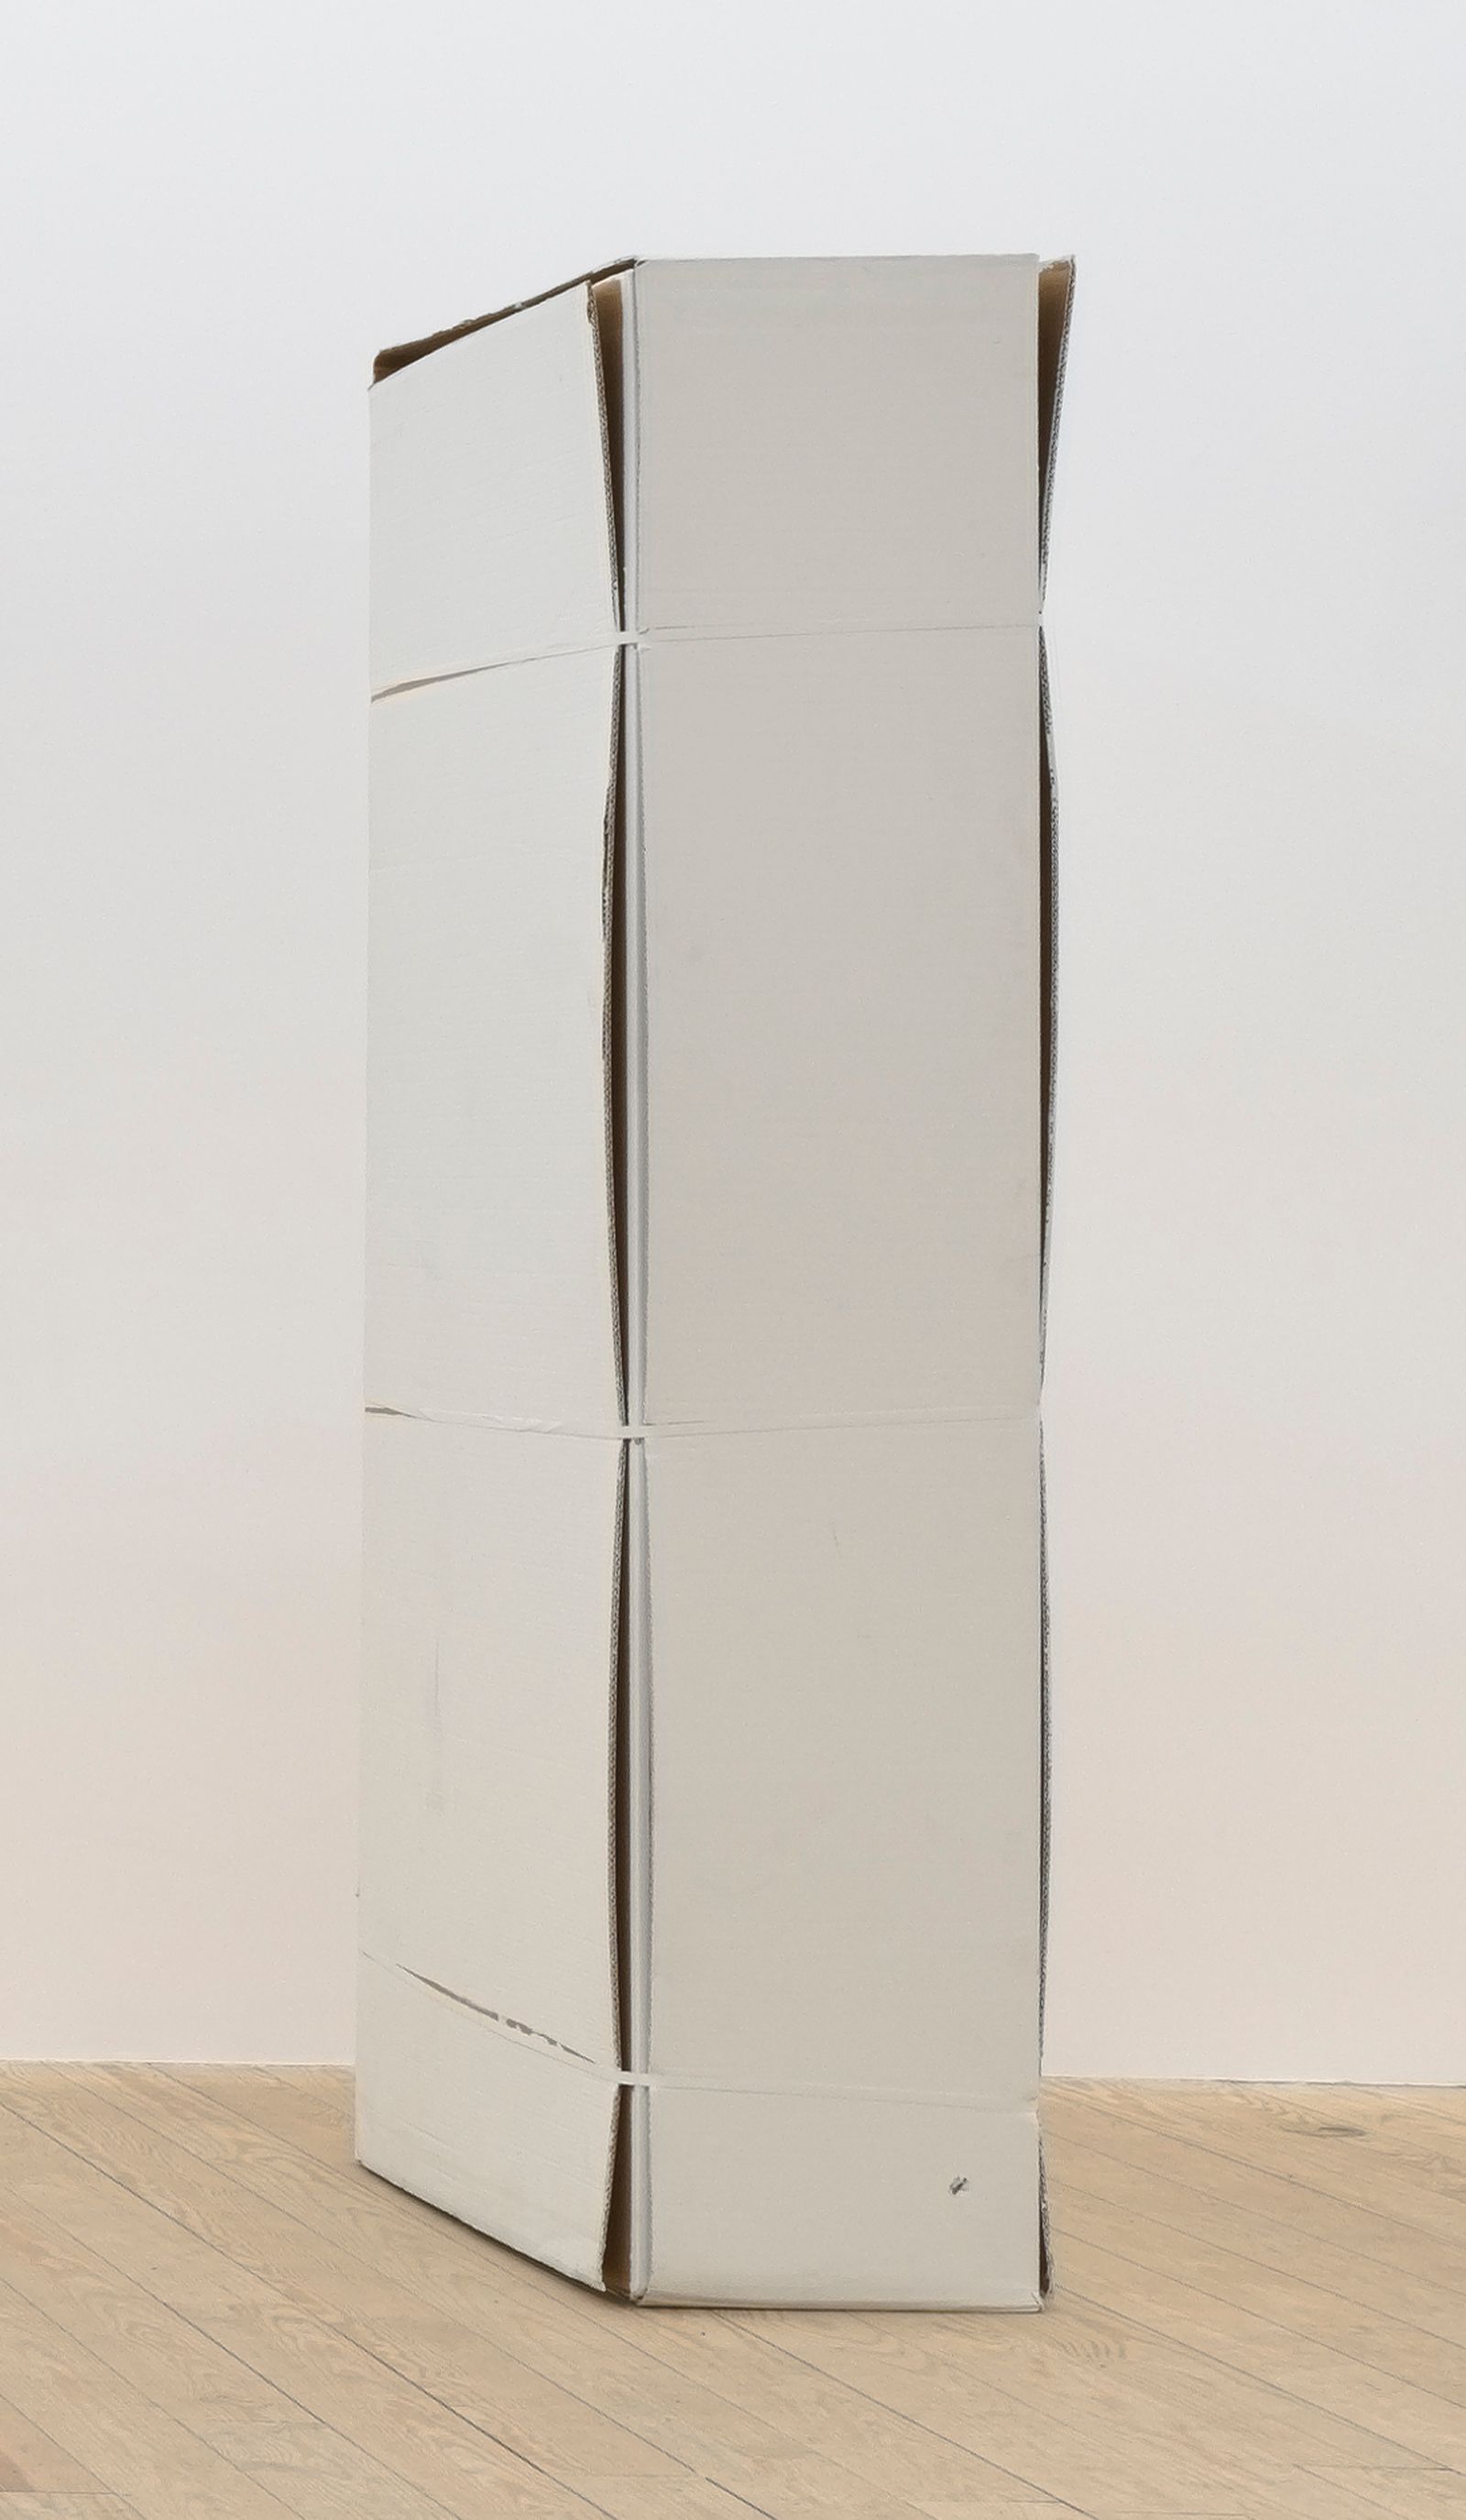 Pamela Rosenkranz, ULTRA SMOOTH CONTENT (AVALANCE WHITE), 2012, Ikea couch inside painted cardboard box, 78 × 34 × 15 in.